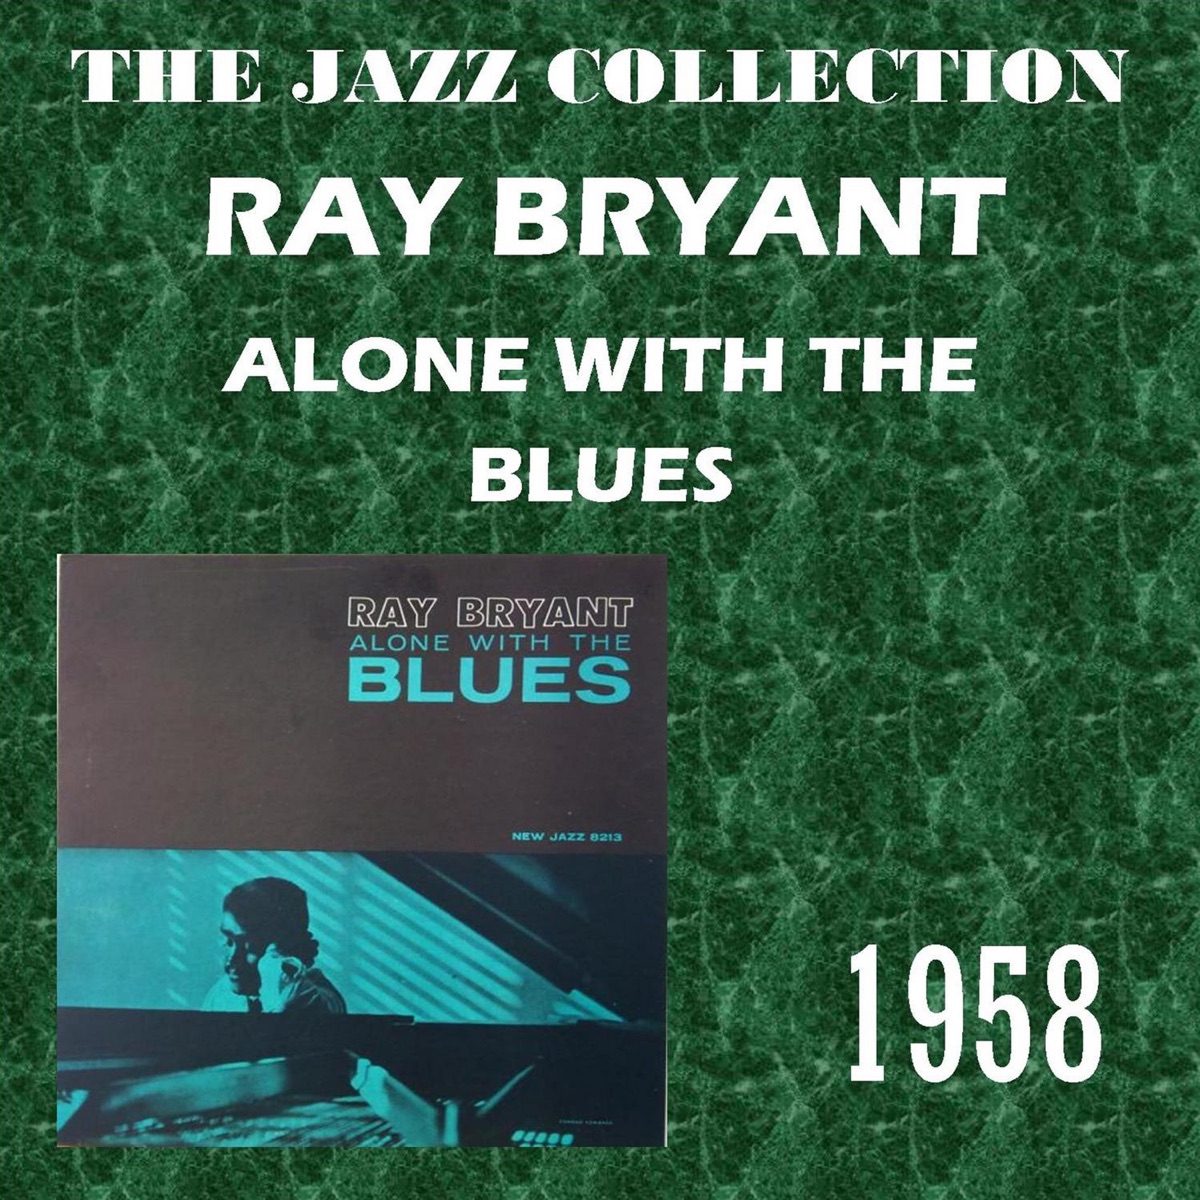 Alone With the Blues - Album by Ray Bryant - Apple Music